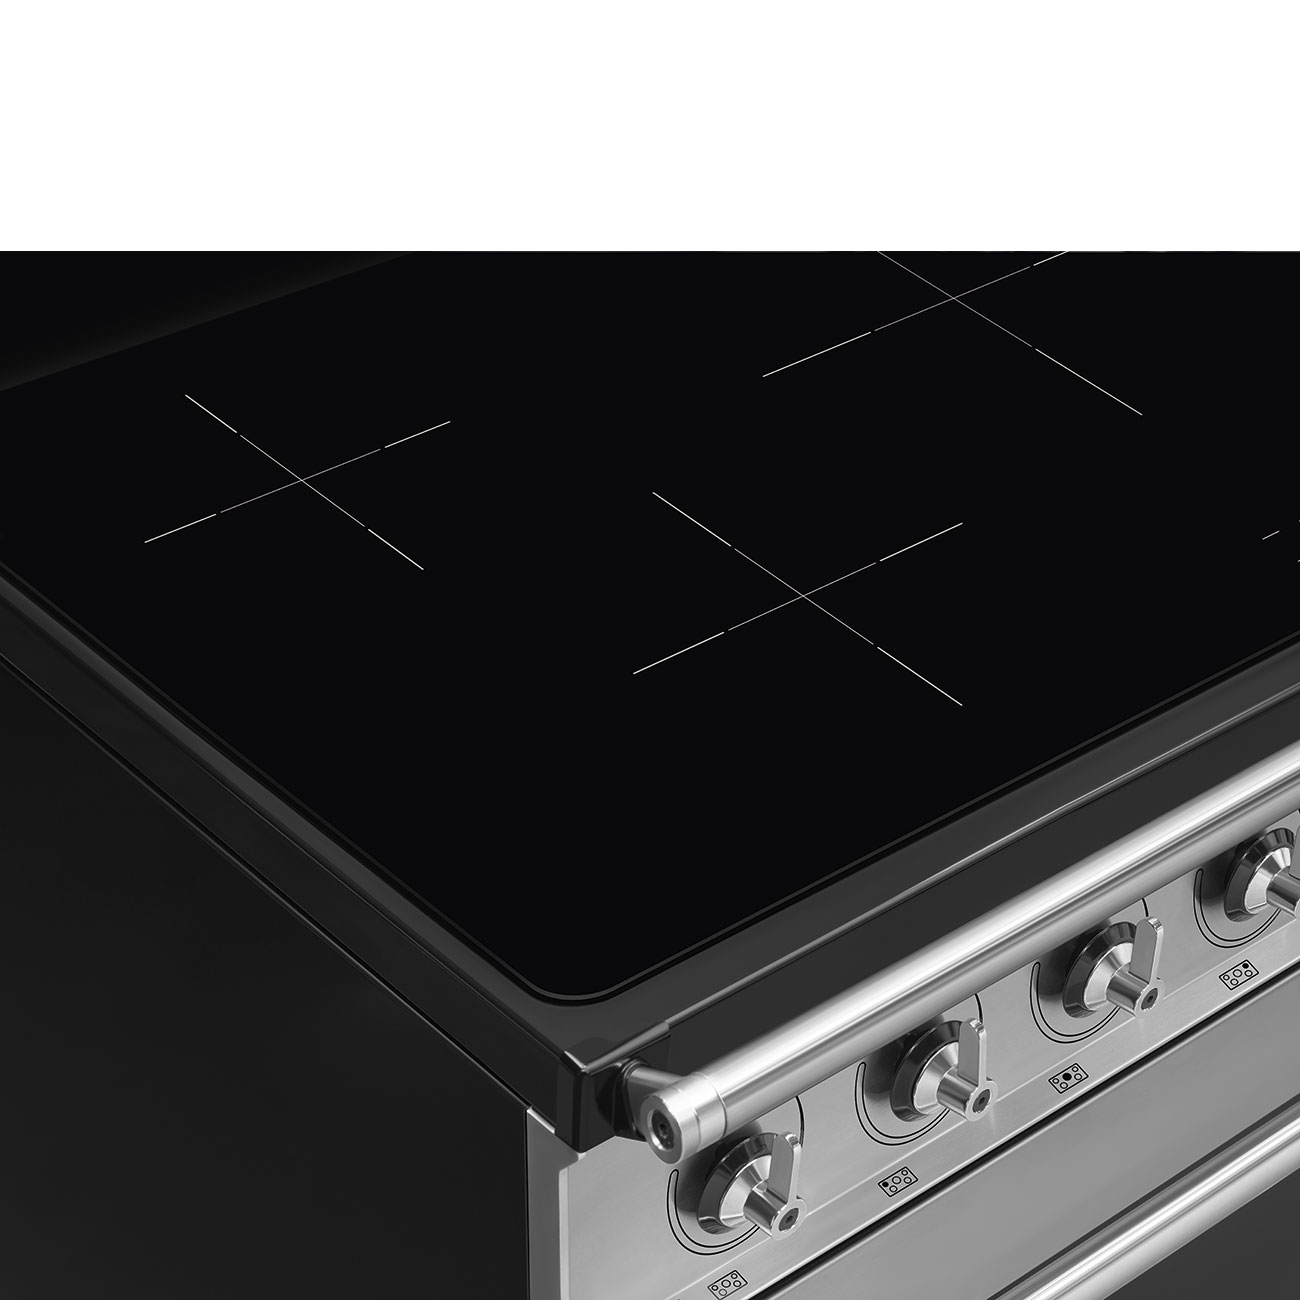 Smeg Stainless steel Cooker with Induction Hob_6